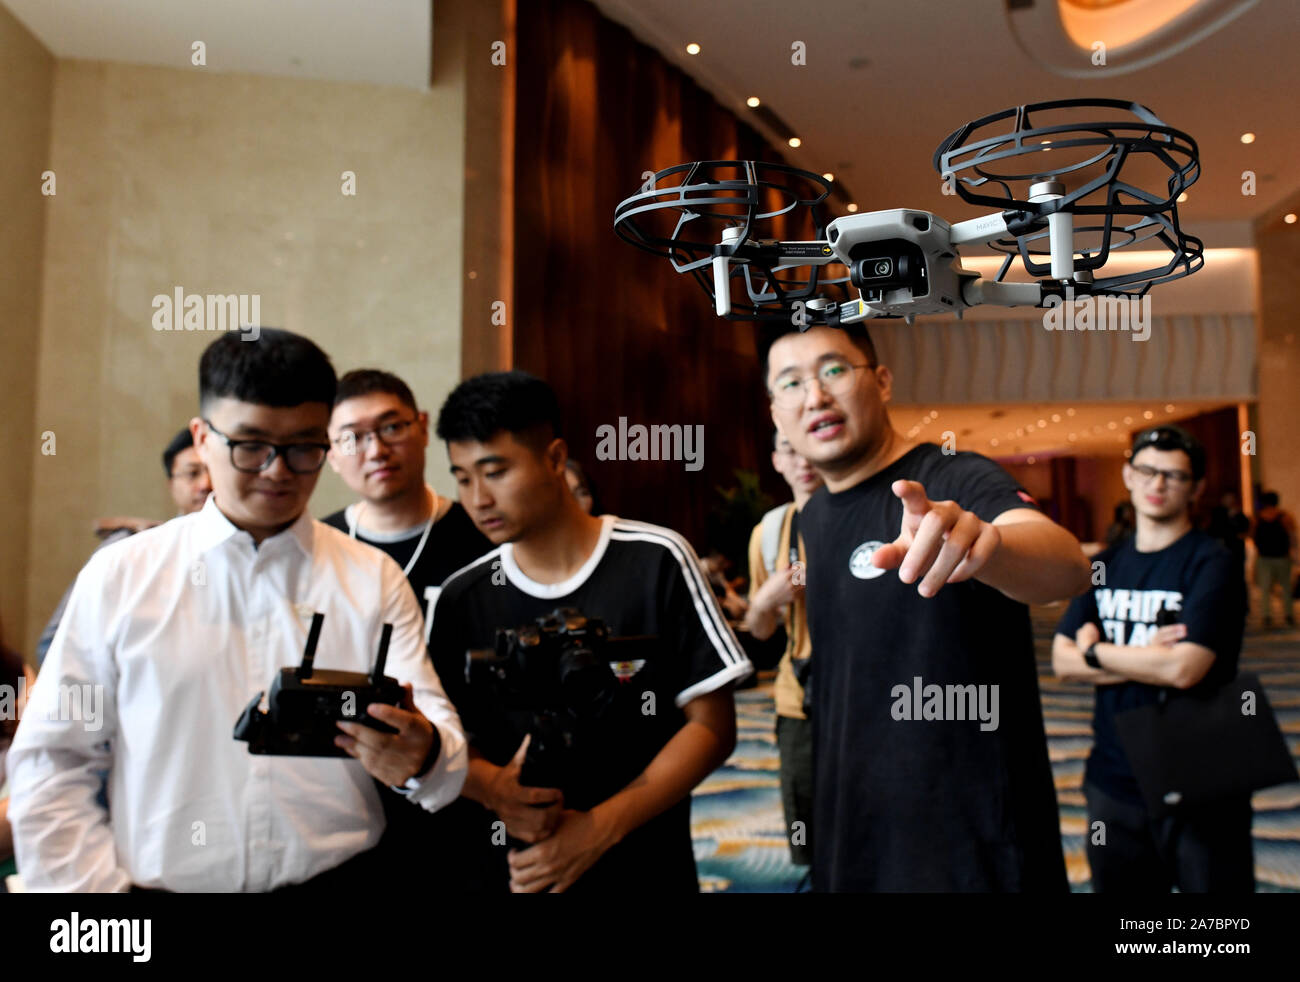 Beijing, China's Hainan Province. 31st Oct, 2019. A man experiences the  Mavic Mini drone unveiled during a new product launch event by DJI, a  famous Chinese drone maker, in Sanya, south China's